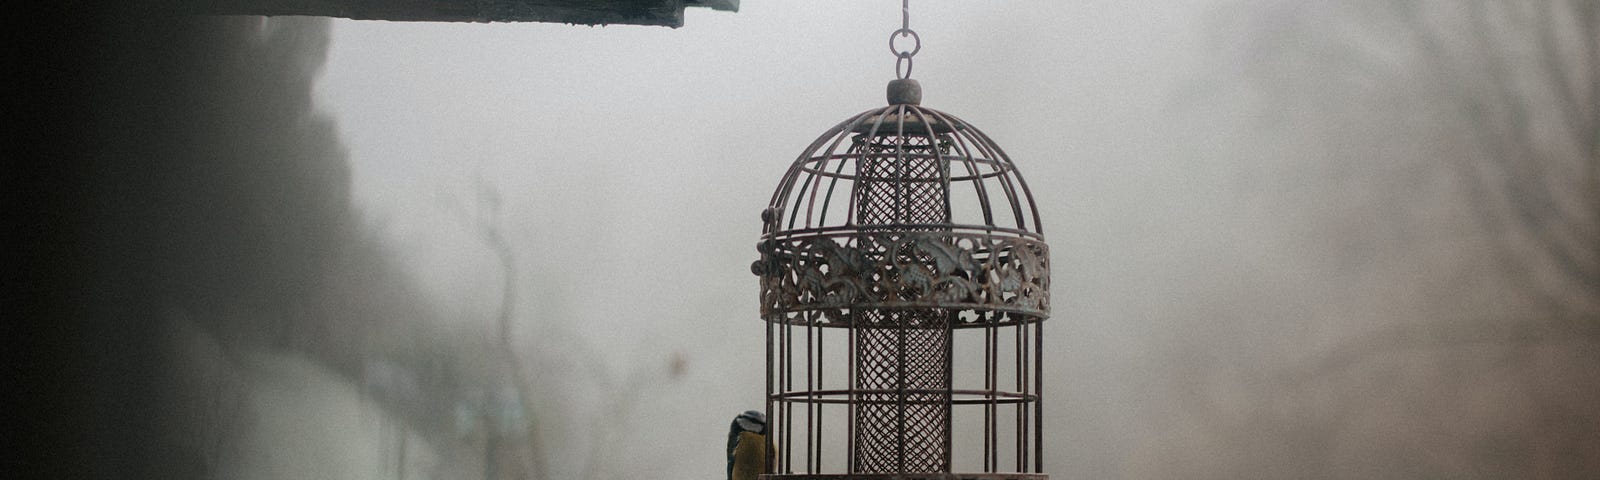 Bird cage hanging in mist with bird perched on outside.